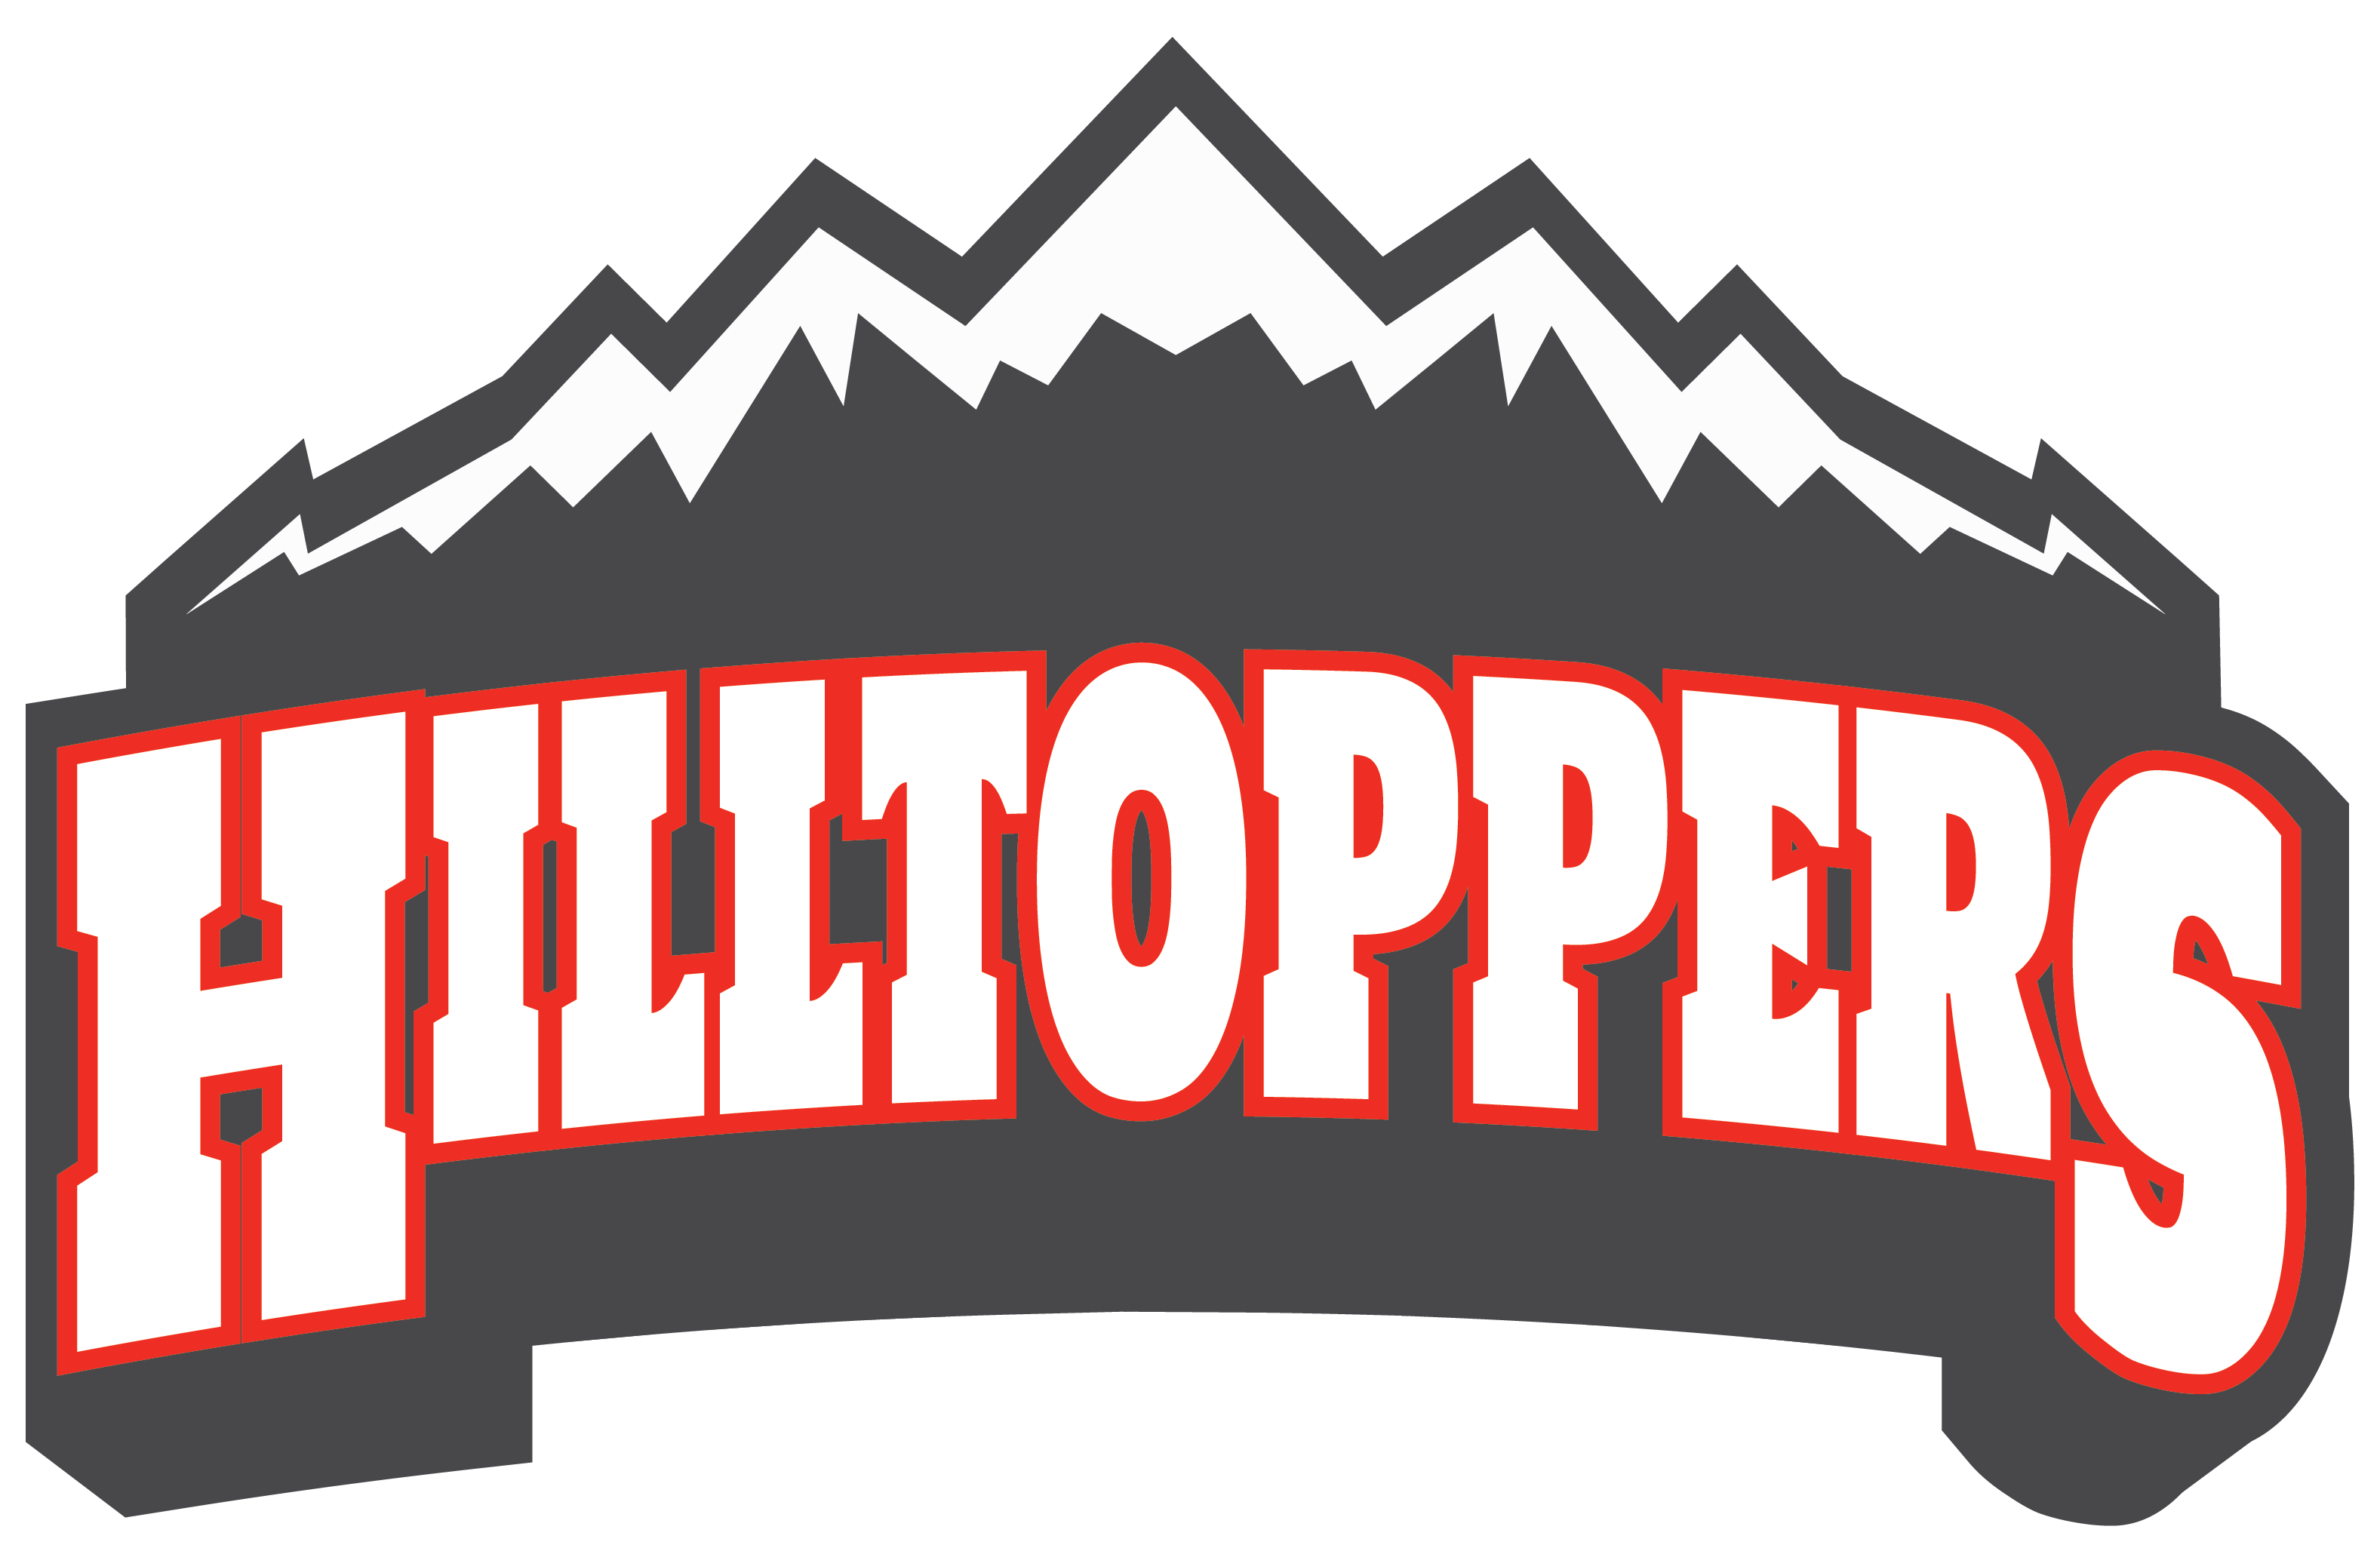 Hilltoppers Logo - WH Brand and Logos Hilltop School District